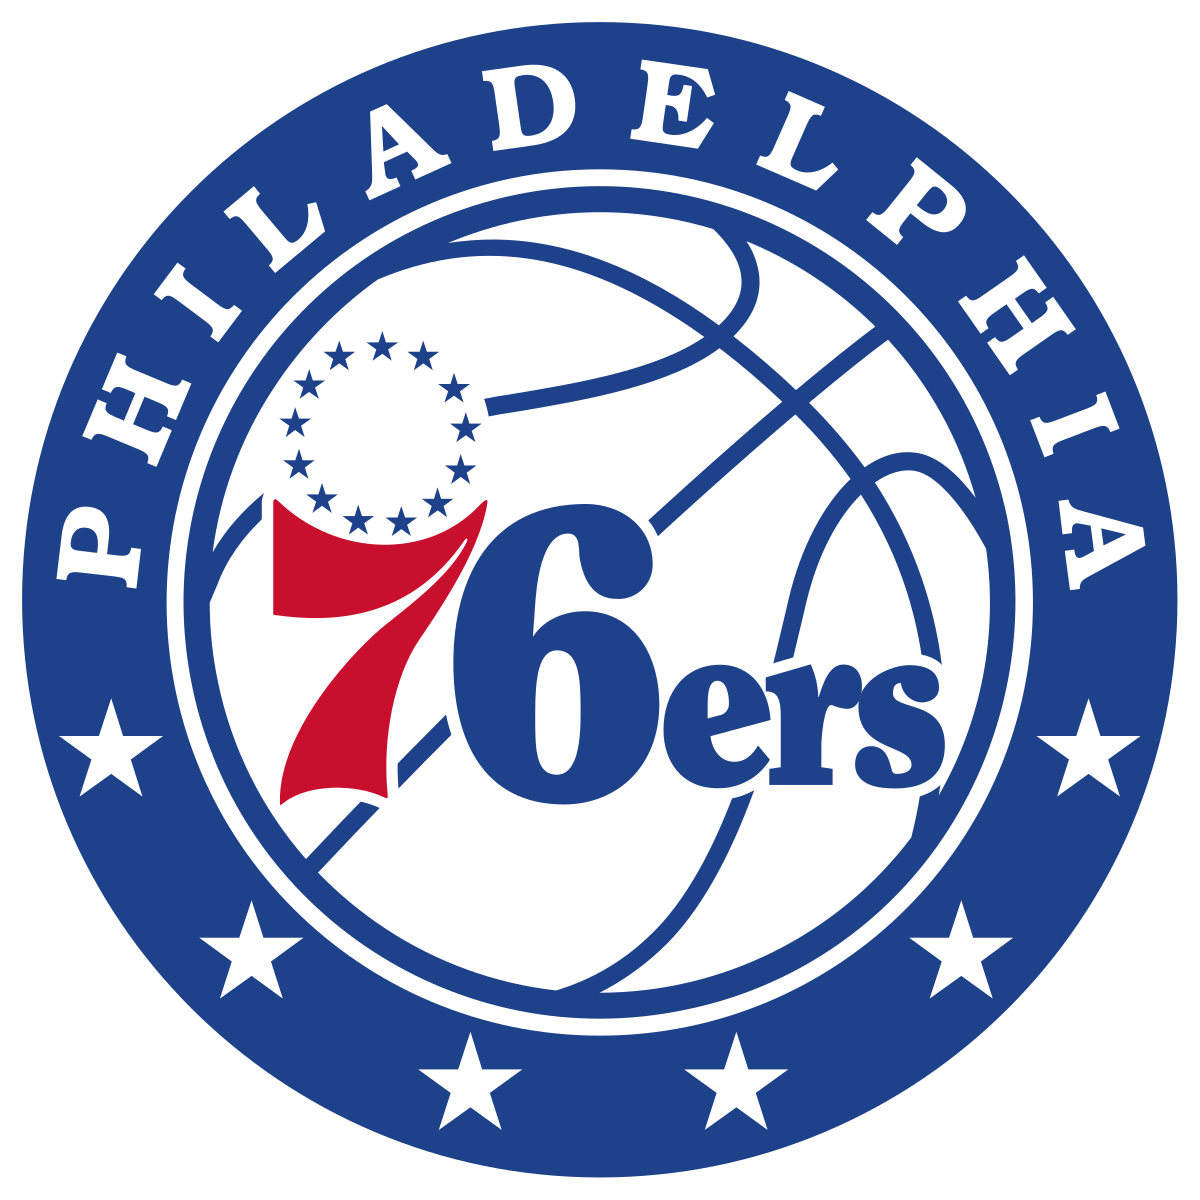 Chinatown orgs form official coalition to oppose Sixers arena, with  high-powered legal support